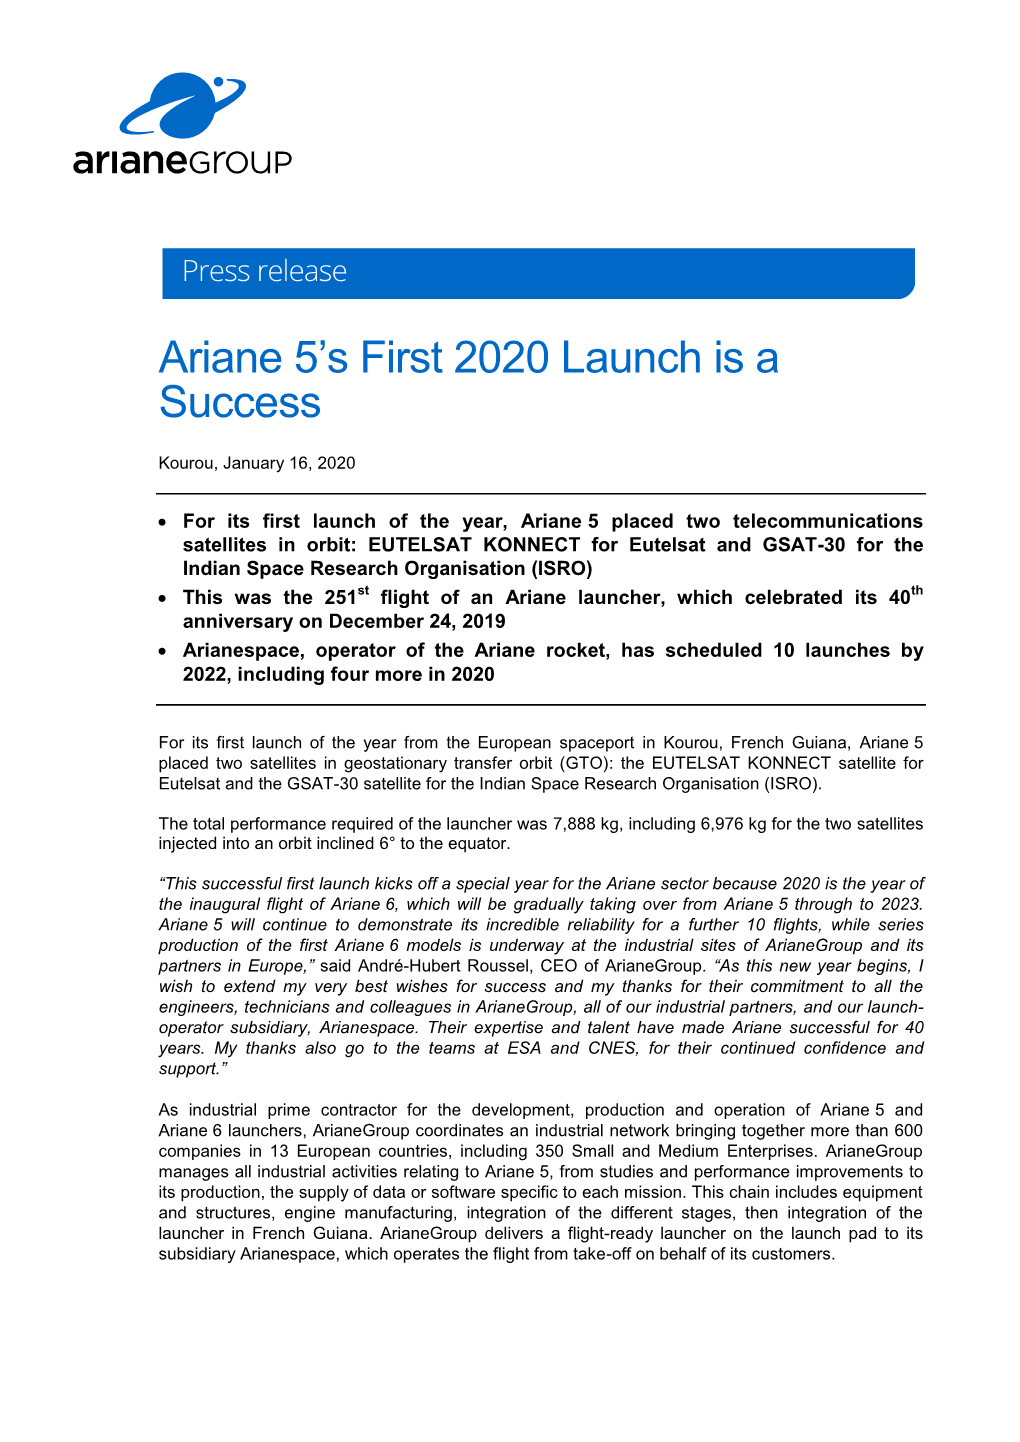 Ariane 5'S First 2020 Launch Is a Success